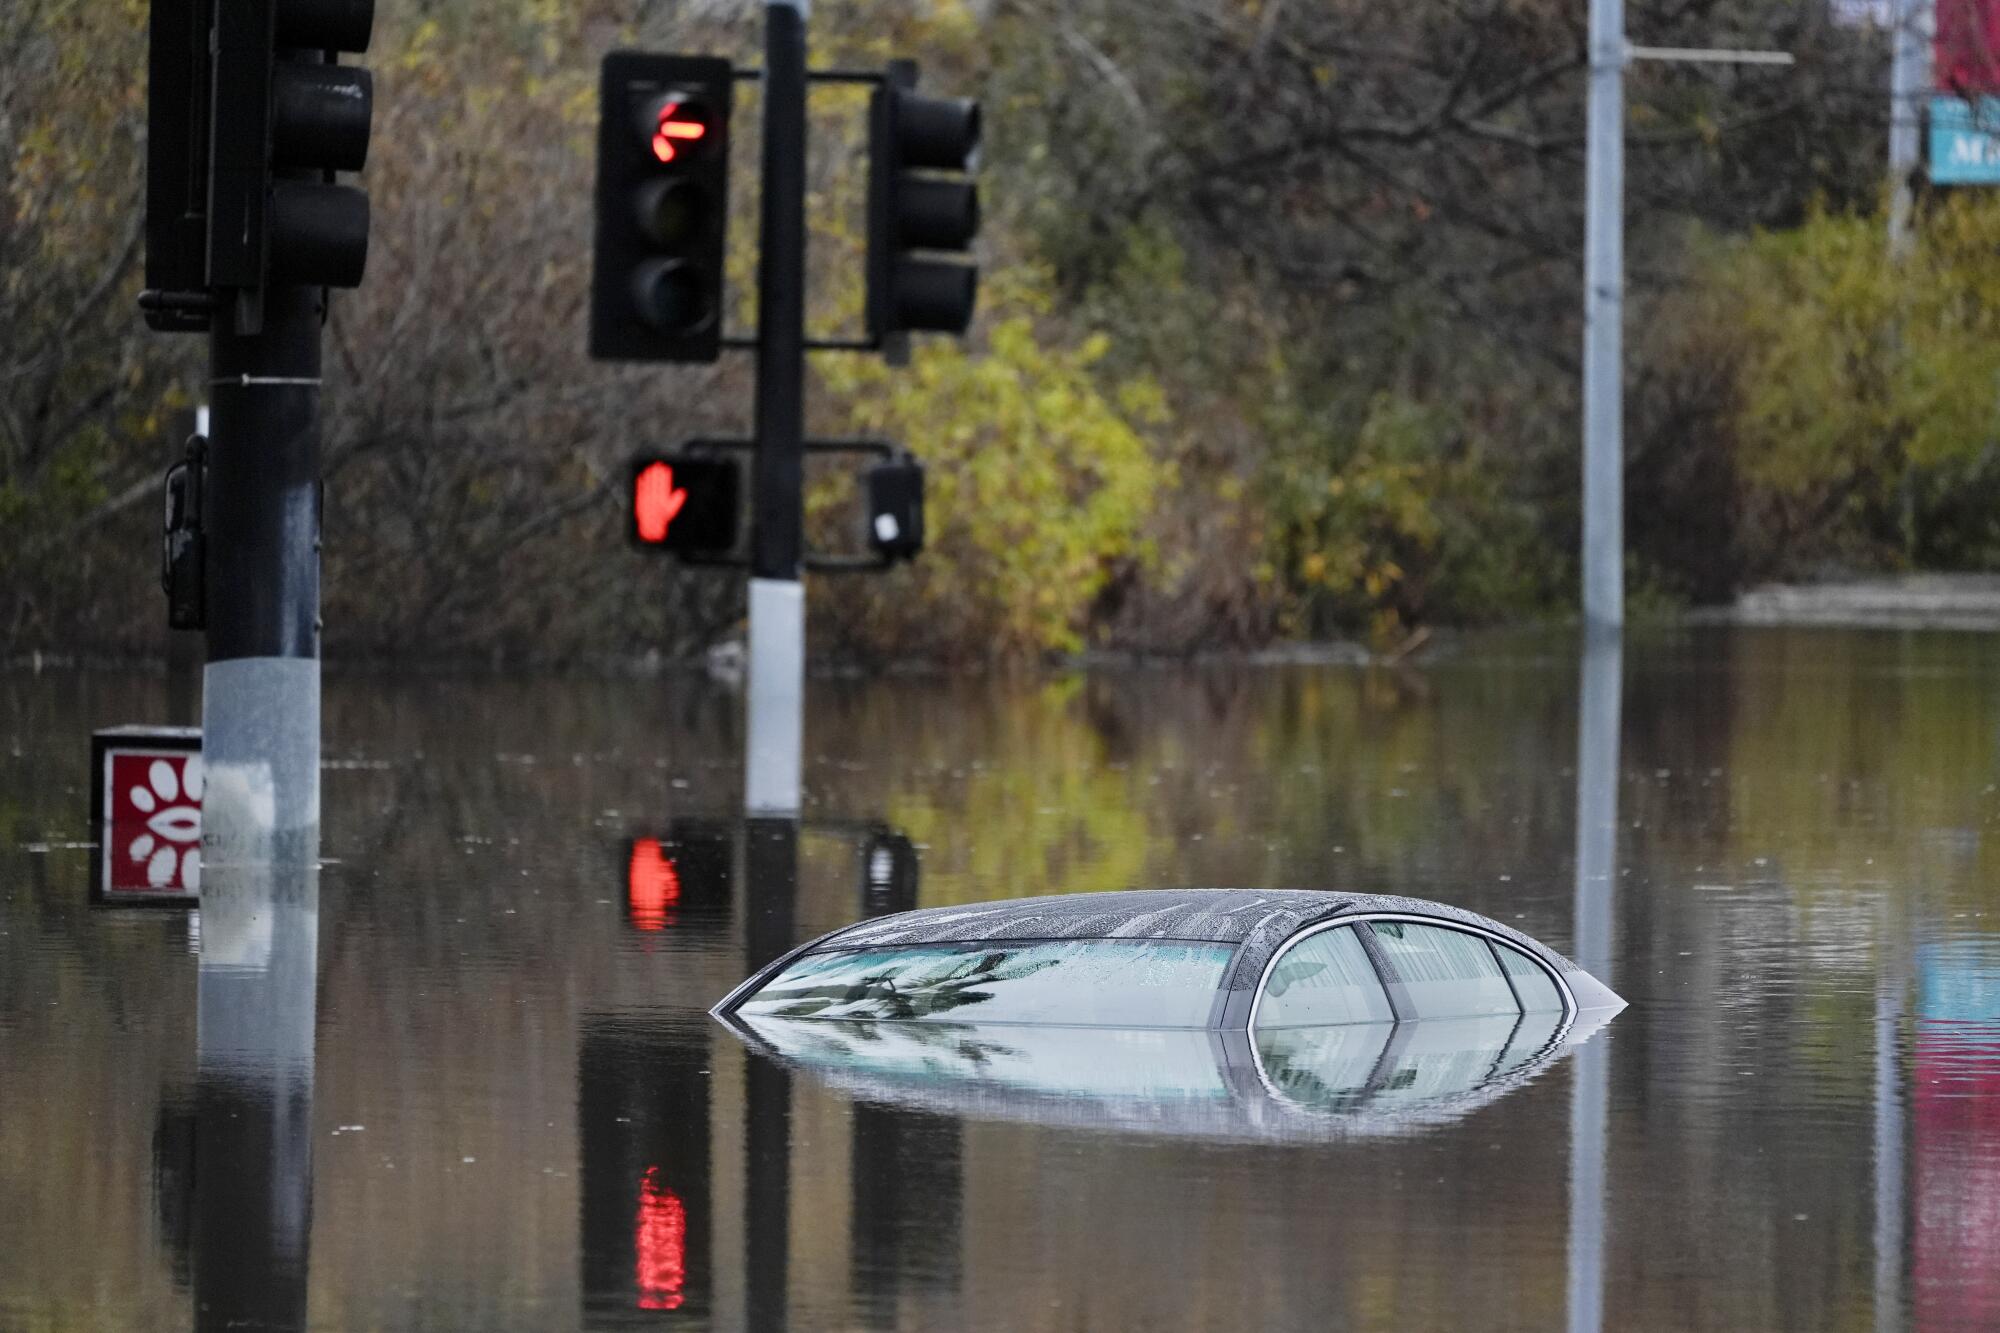 A nearly submerged car in a flooded intersection. 